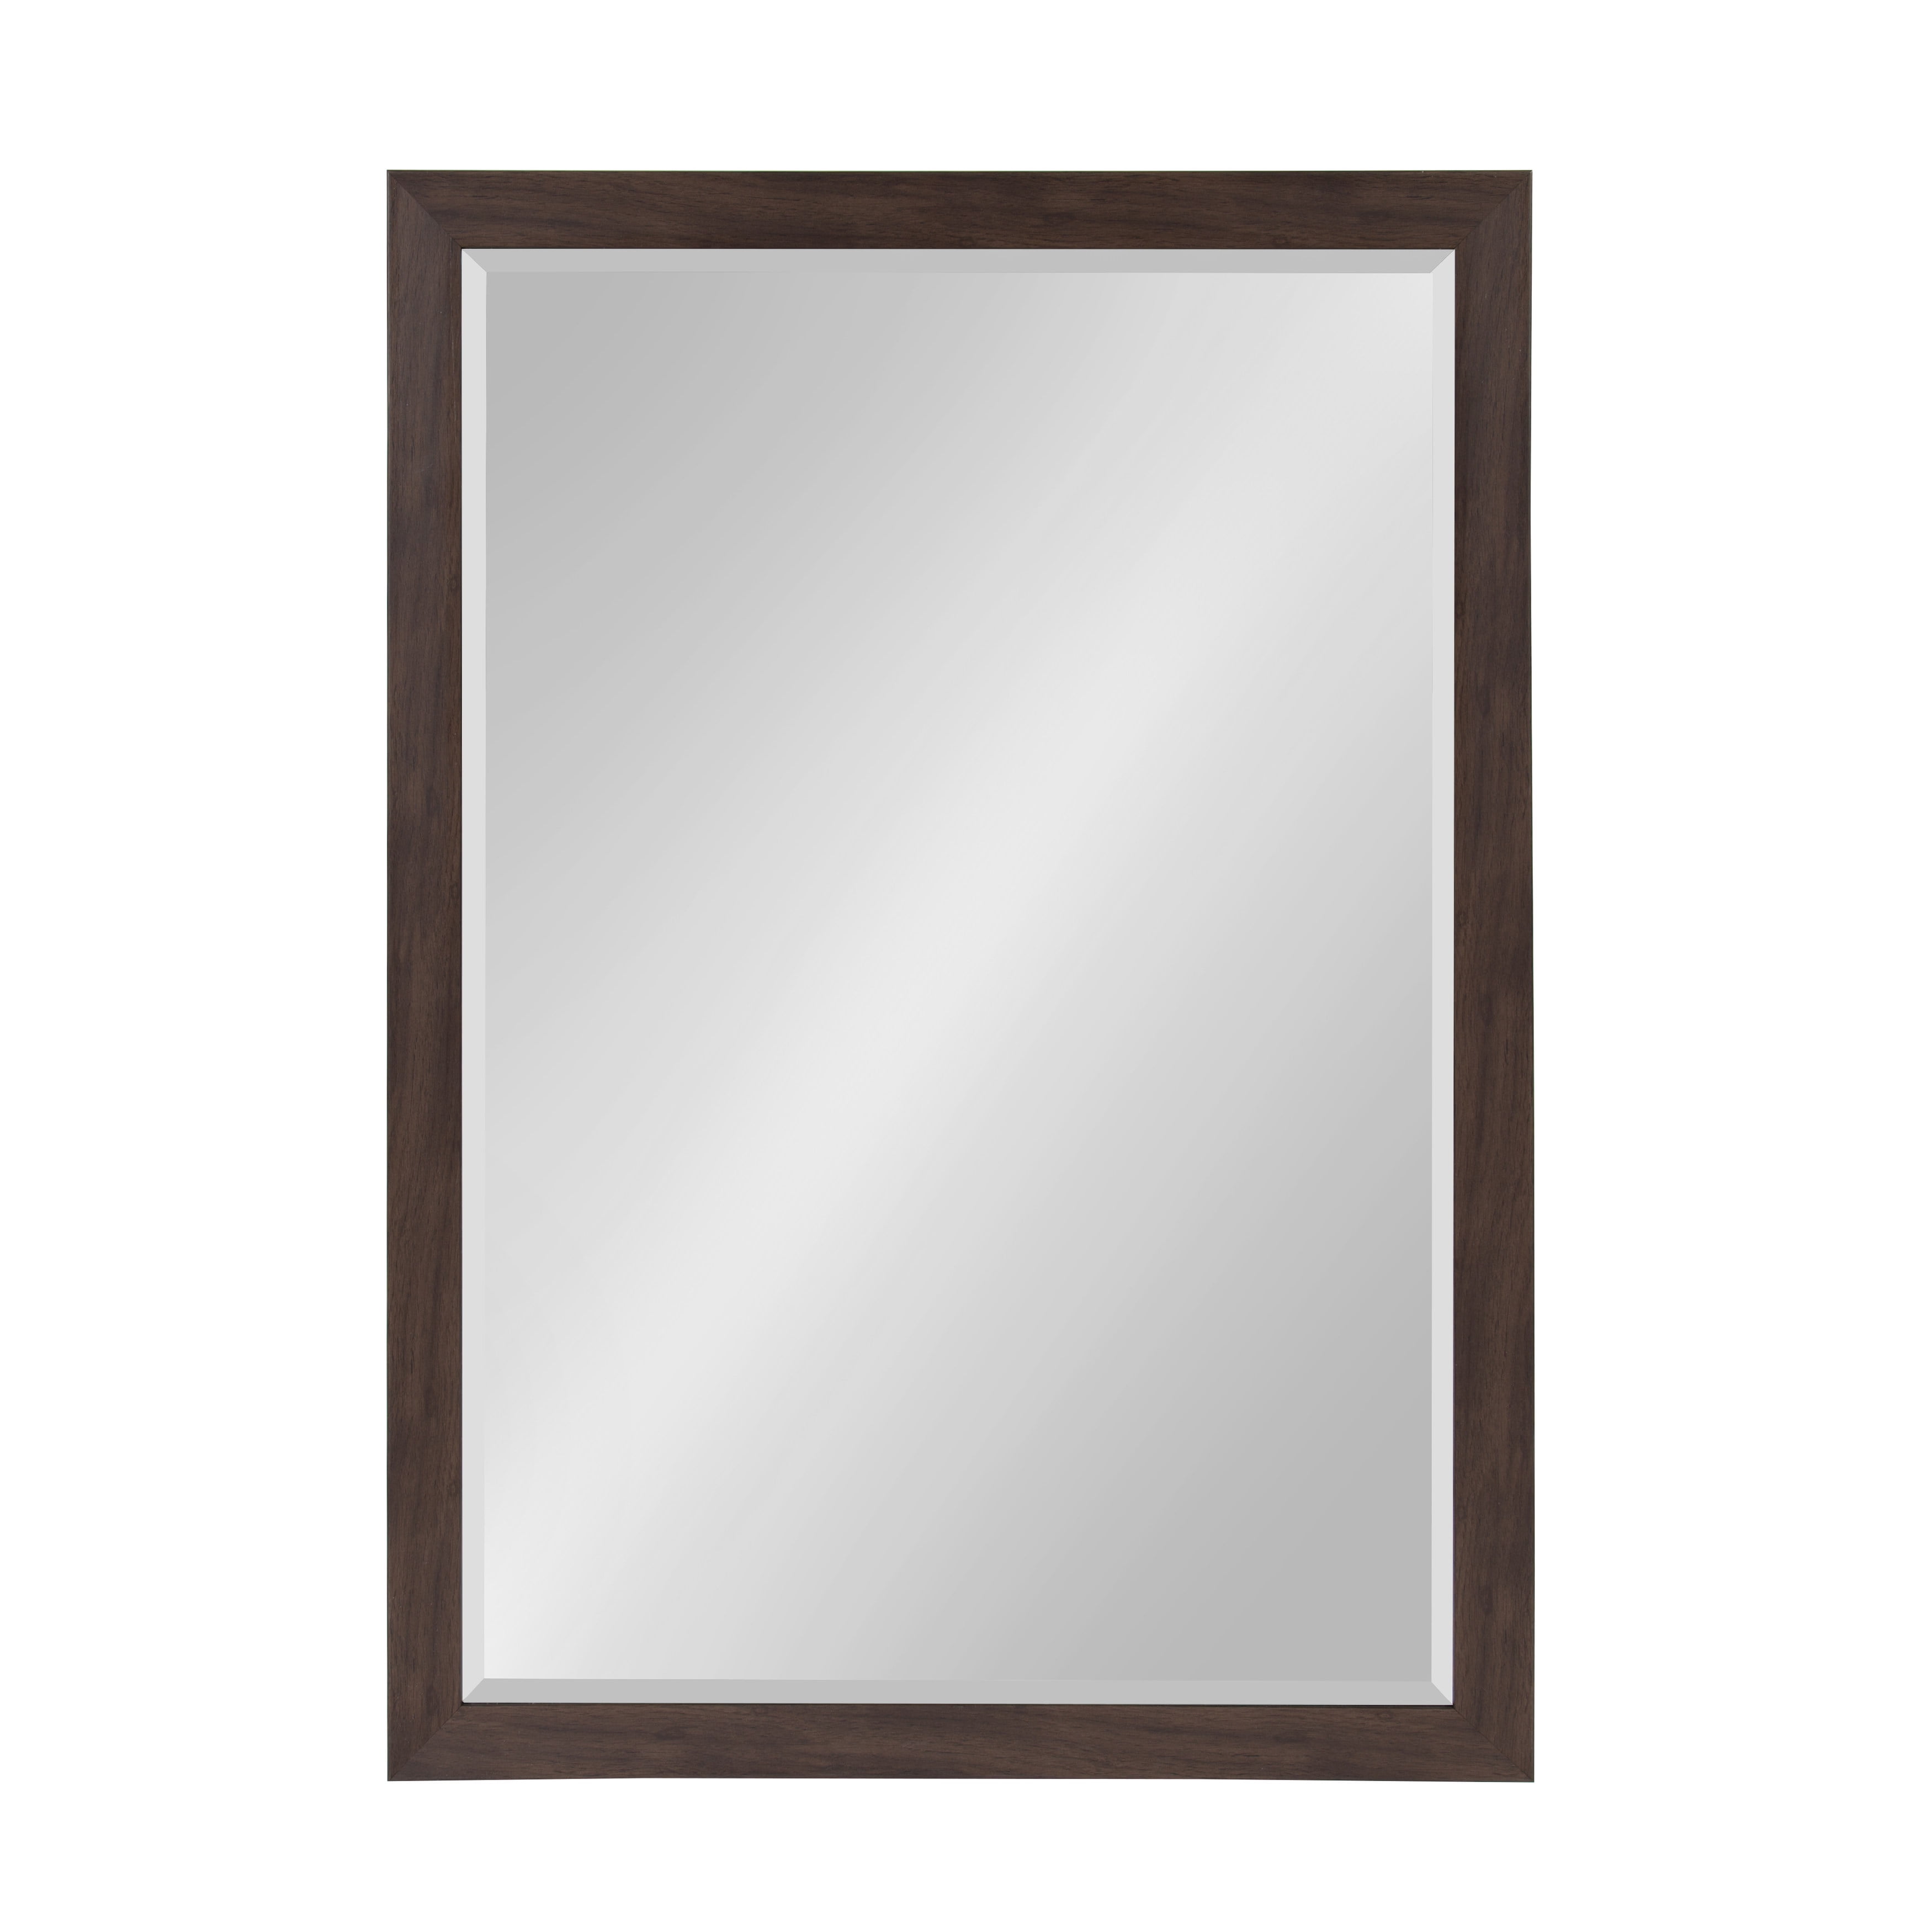 Beatrice Framed Decorative Rectangle, Decorative Rectangle Wall Mirrors